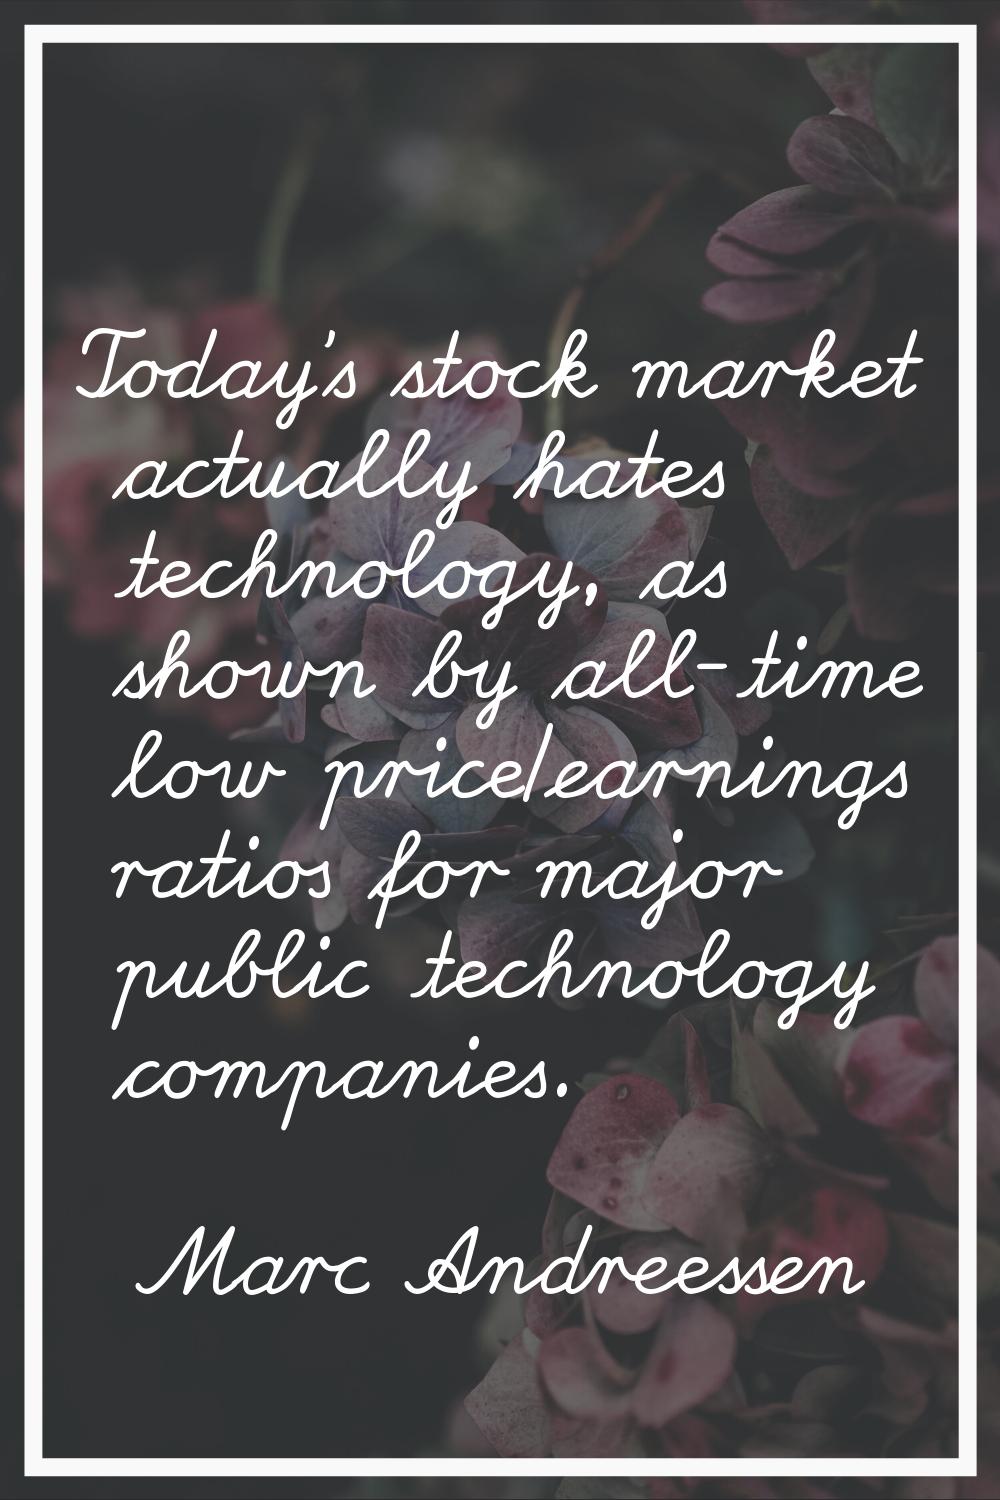 Today's stock market actually hates technology, as shown by all-time low price/earnings ratios for 